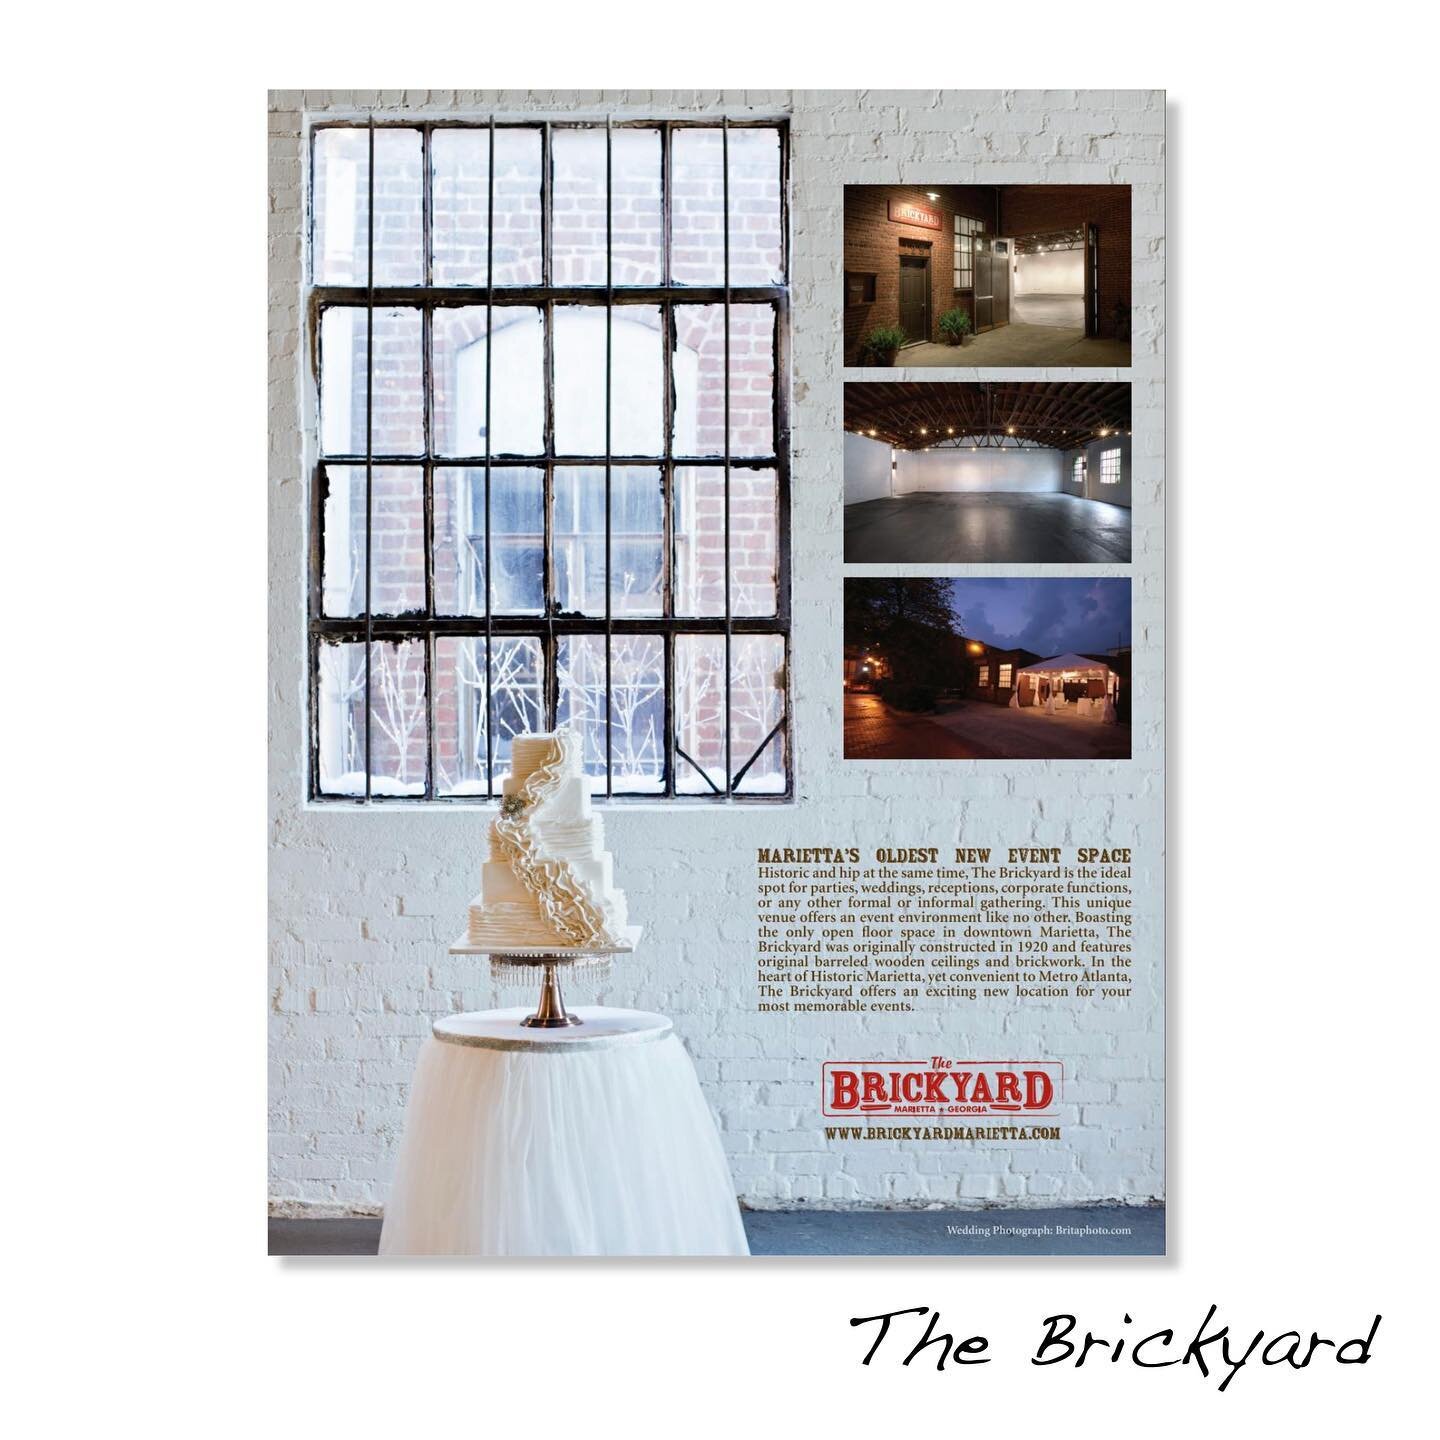 One of our first ads for The Brickyard. Now in its 13th year, this beautiful venue has been host to some of Marietta&rsquo;s most memorable moments. 

#ZenithDesignGroup 
#ZDG25
#MarketingConspirators